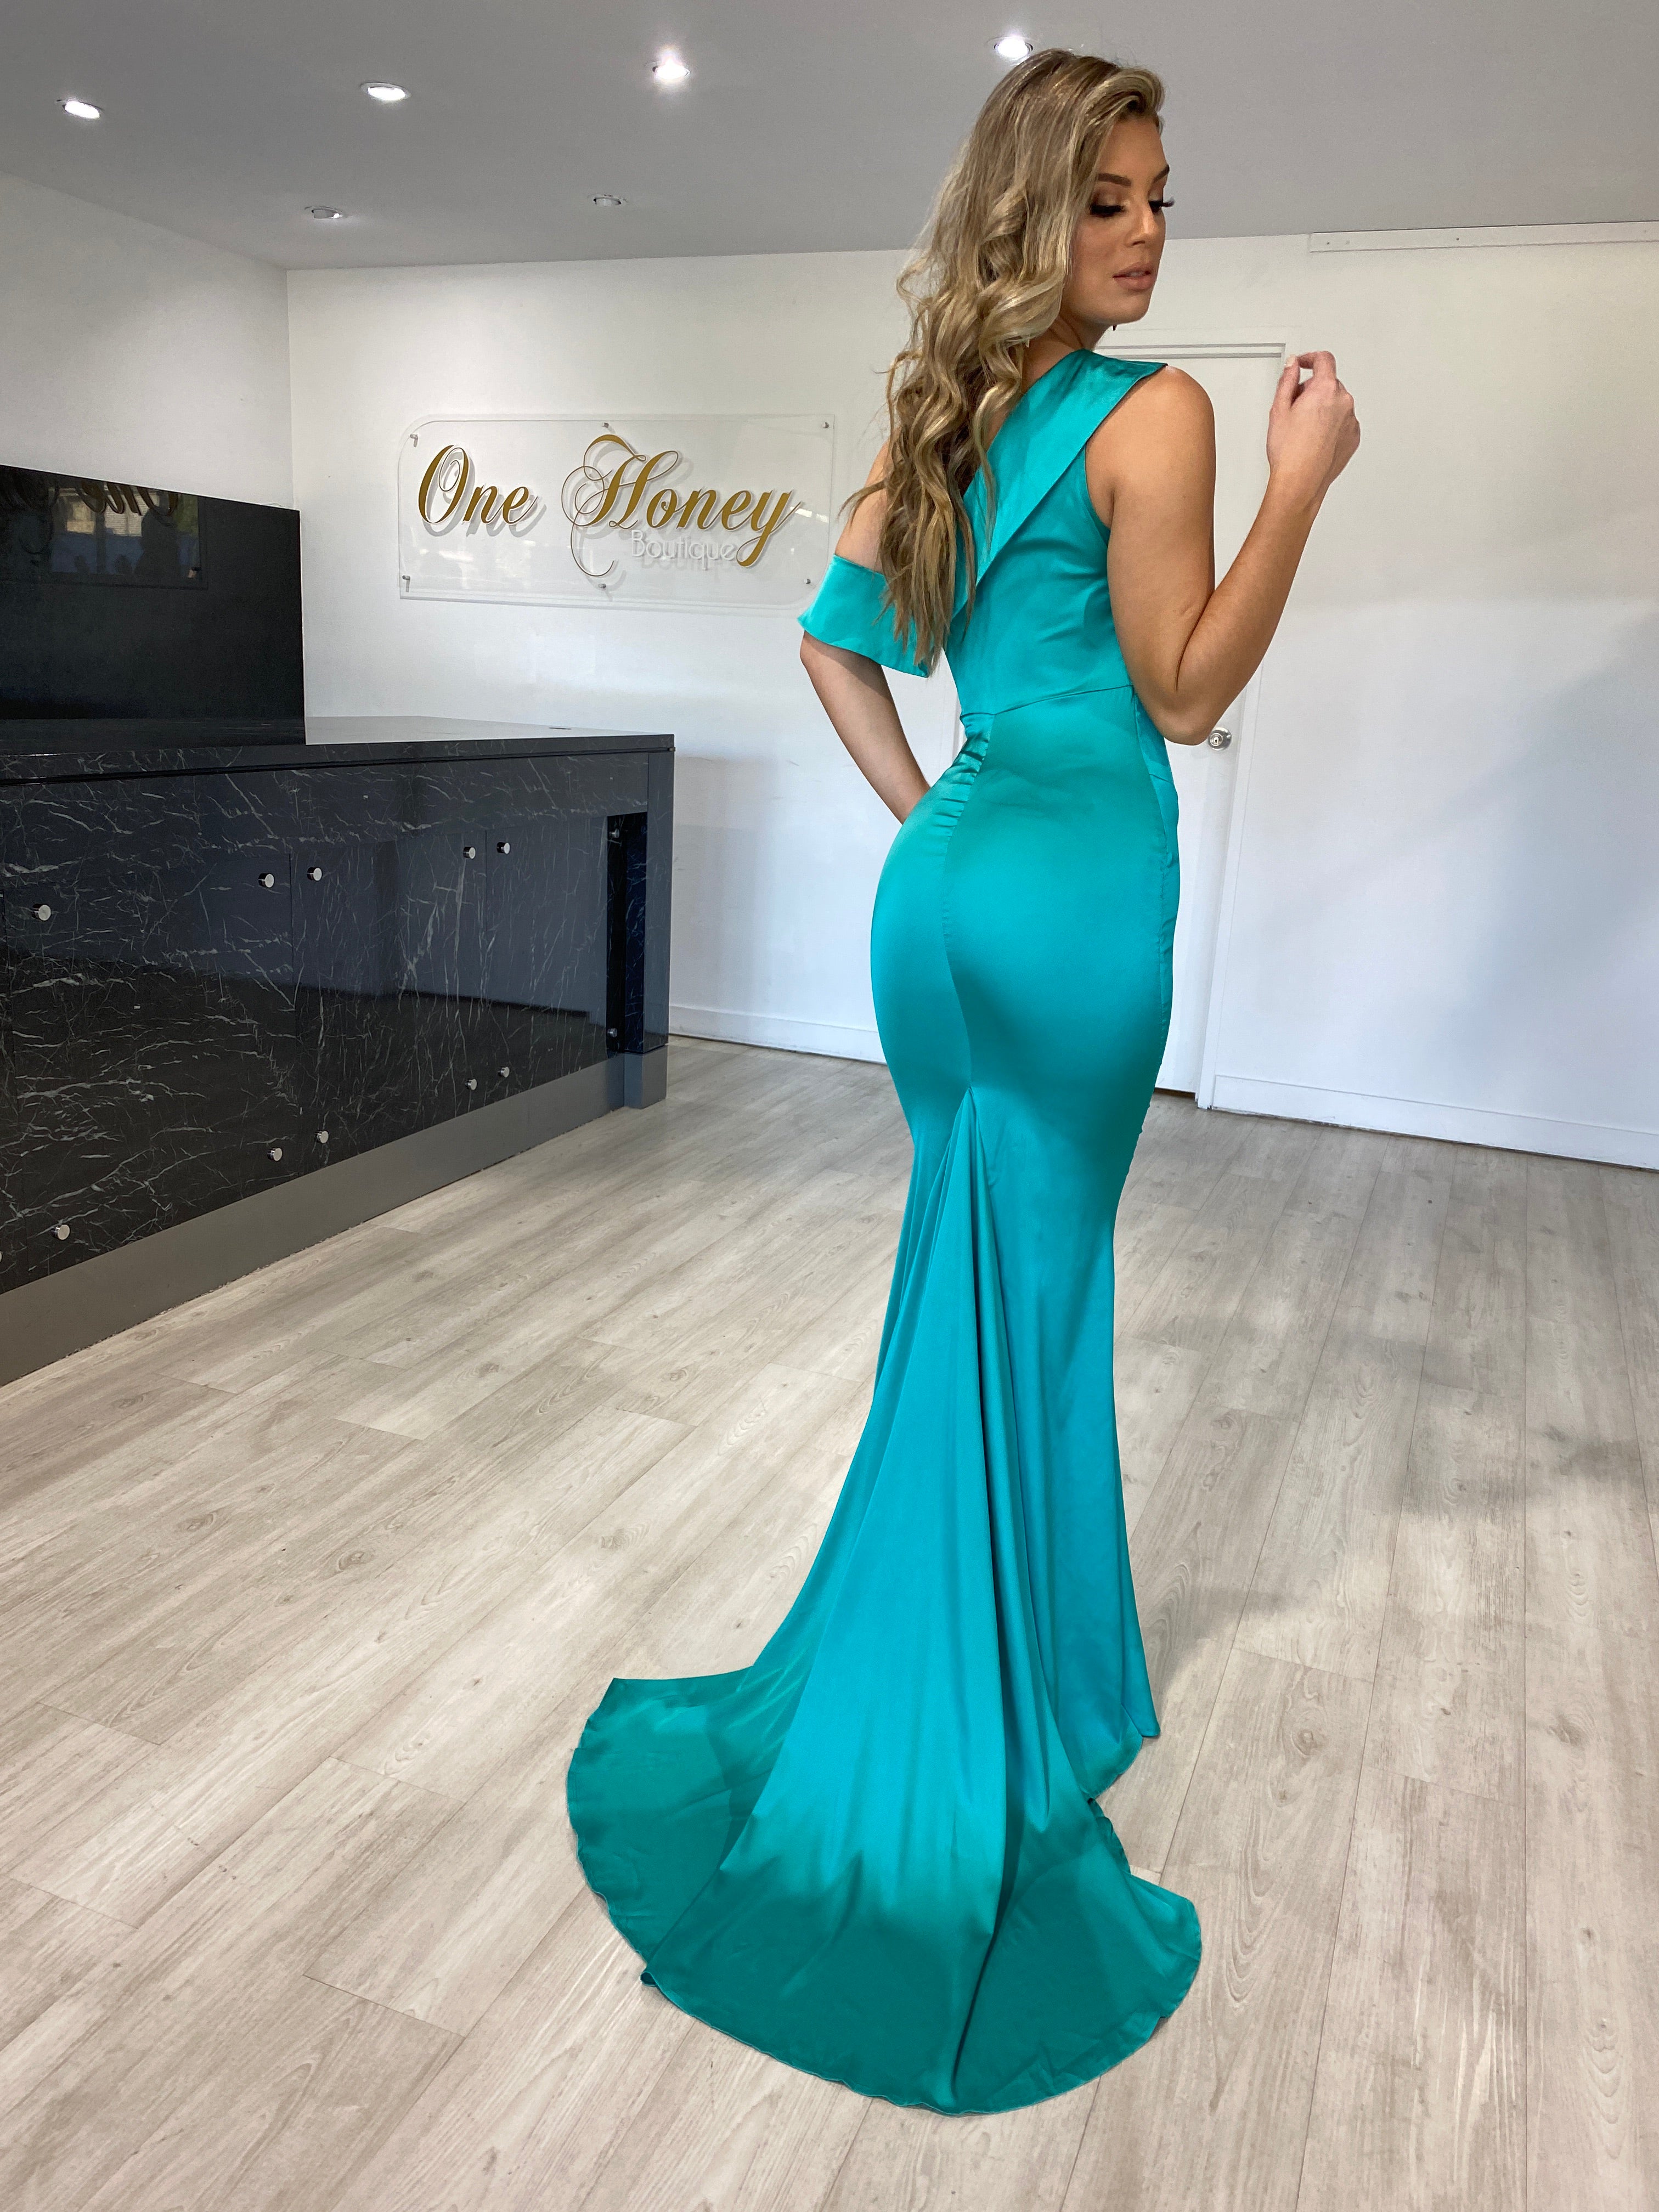 Honey Couture MEL Teal Green One Shoulder Frilly Satin Mermaid Gown